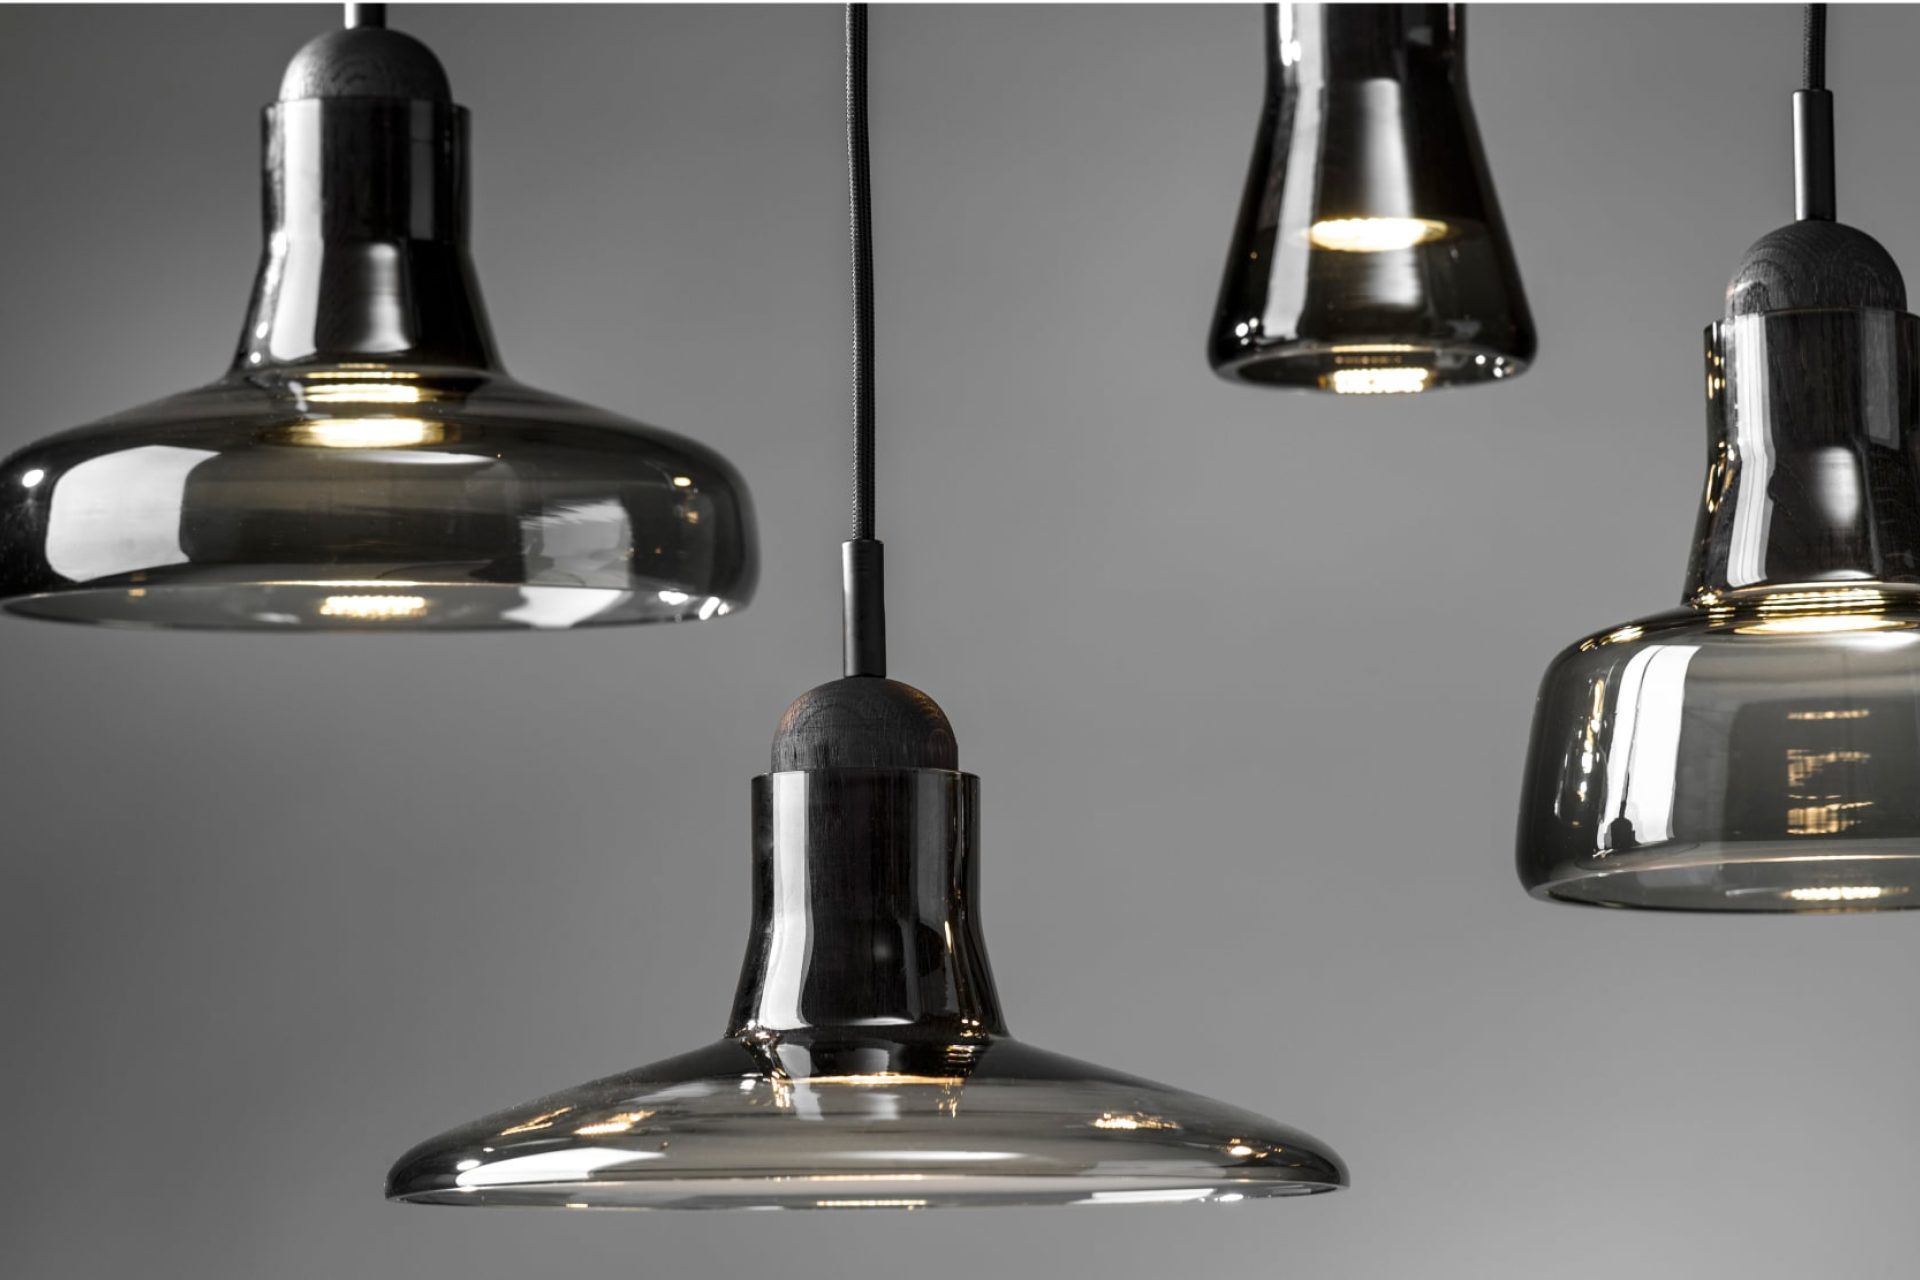 Four pendant smoked-glass lamps, each shaped differently